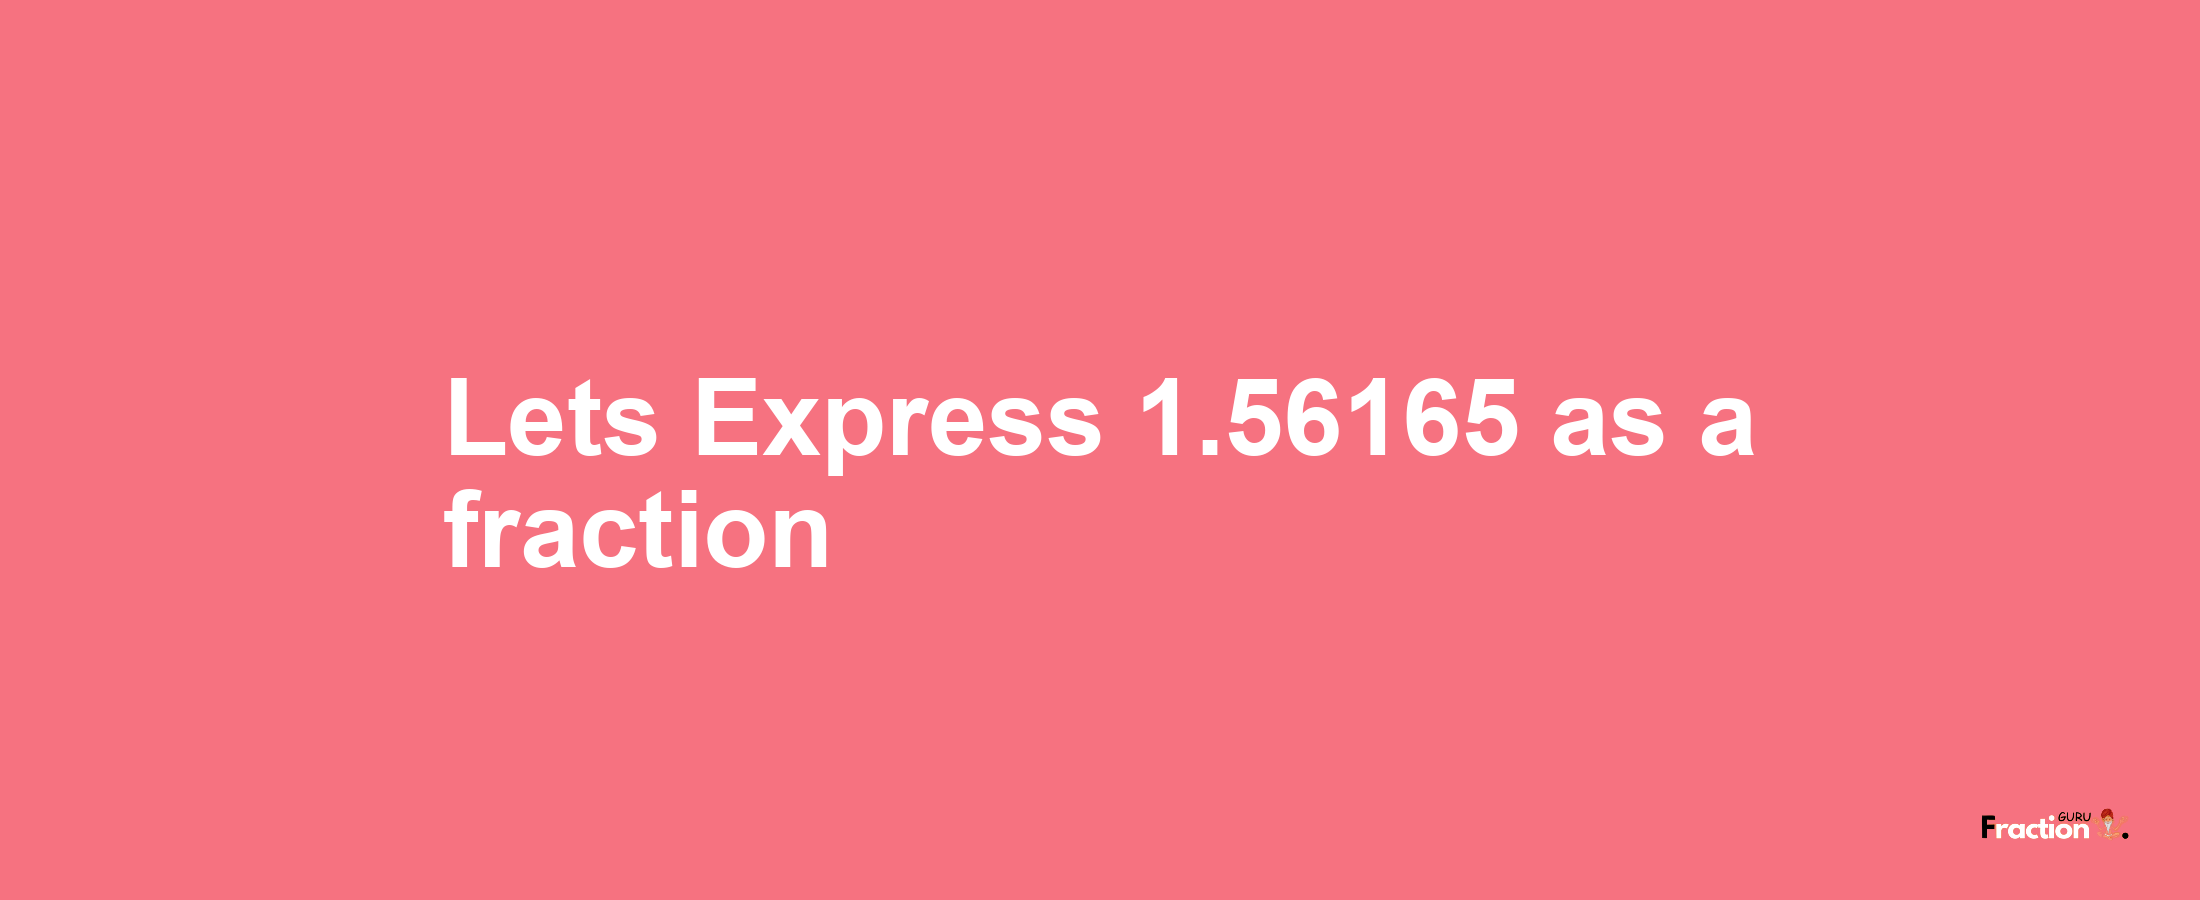 Lets Express 1.56165 as afraction